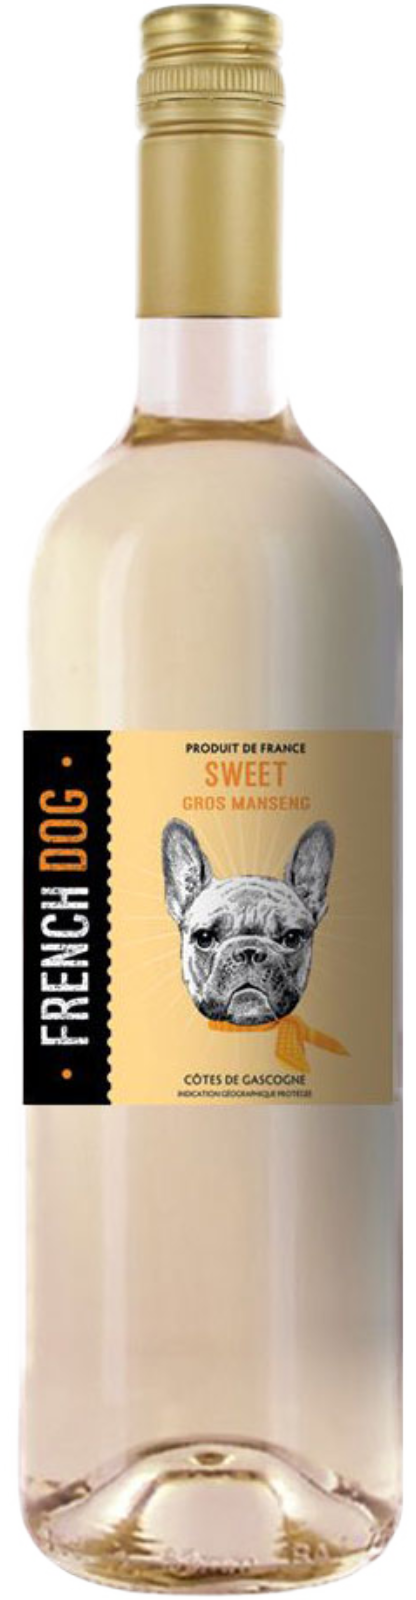 FRENCH DOG - Moelleux (sweet) Gros Manseng